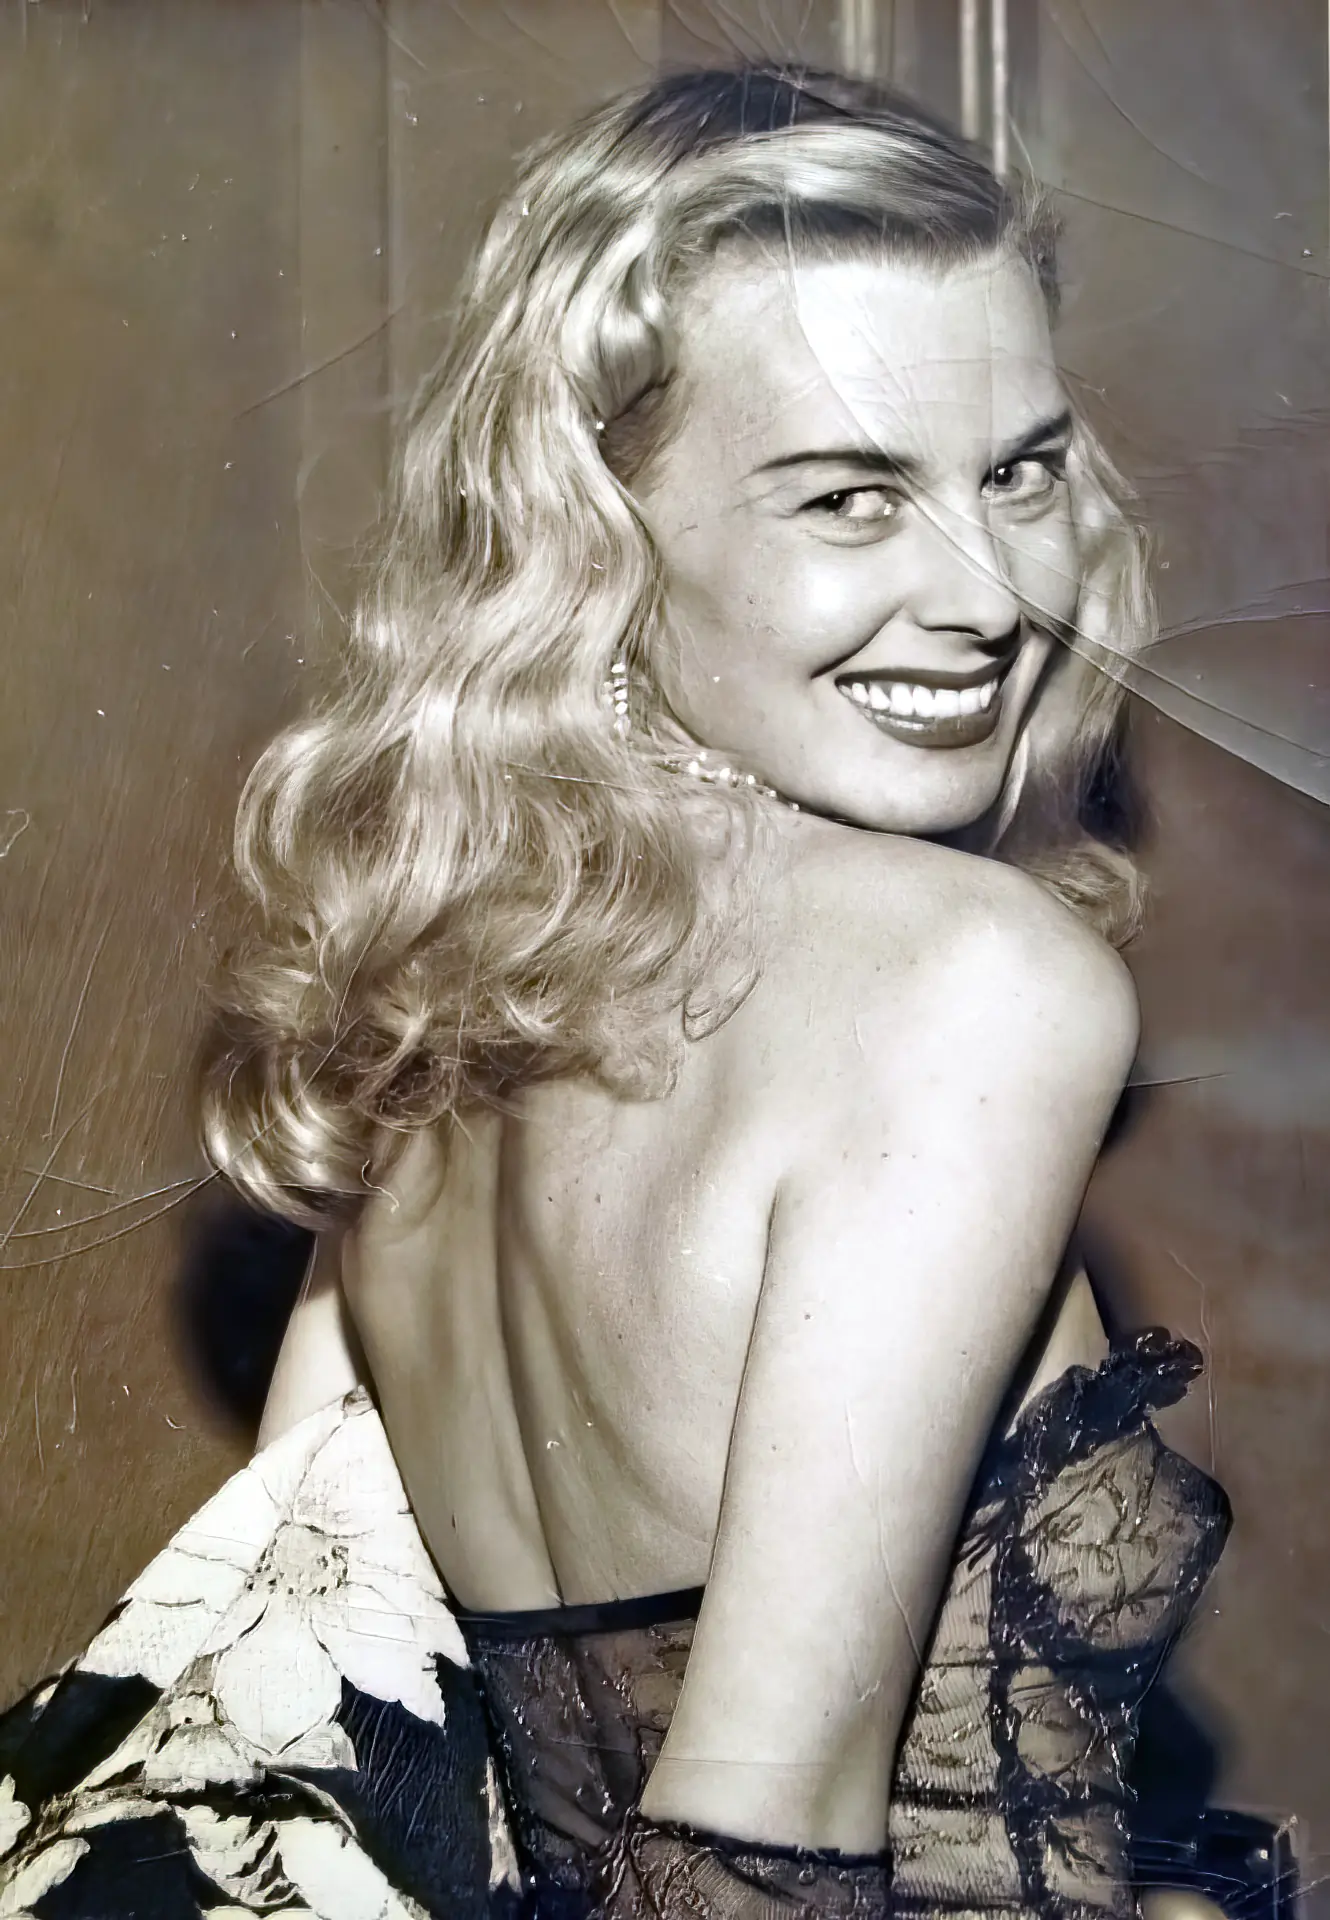 Vintage corset porn photo Vintage blonde in a transparent top smiles at the camera